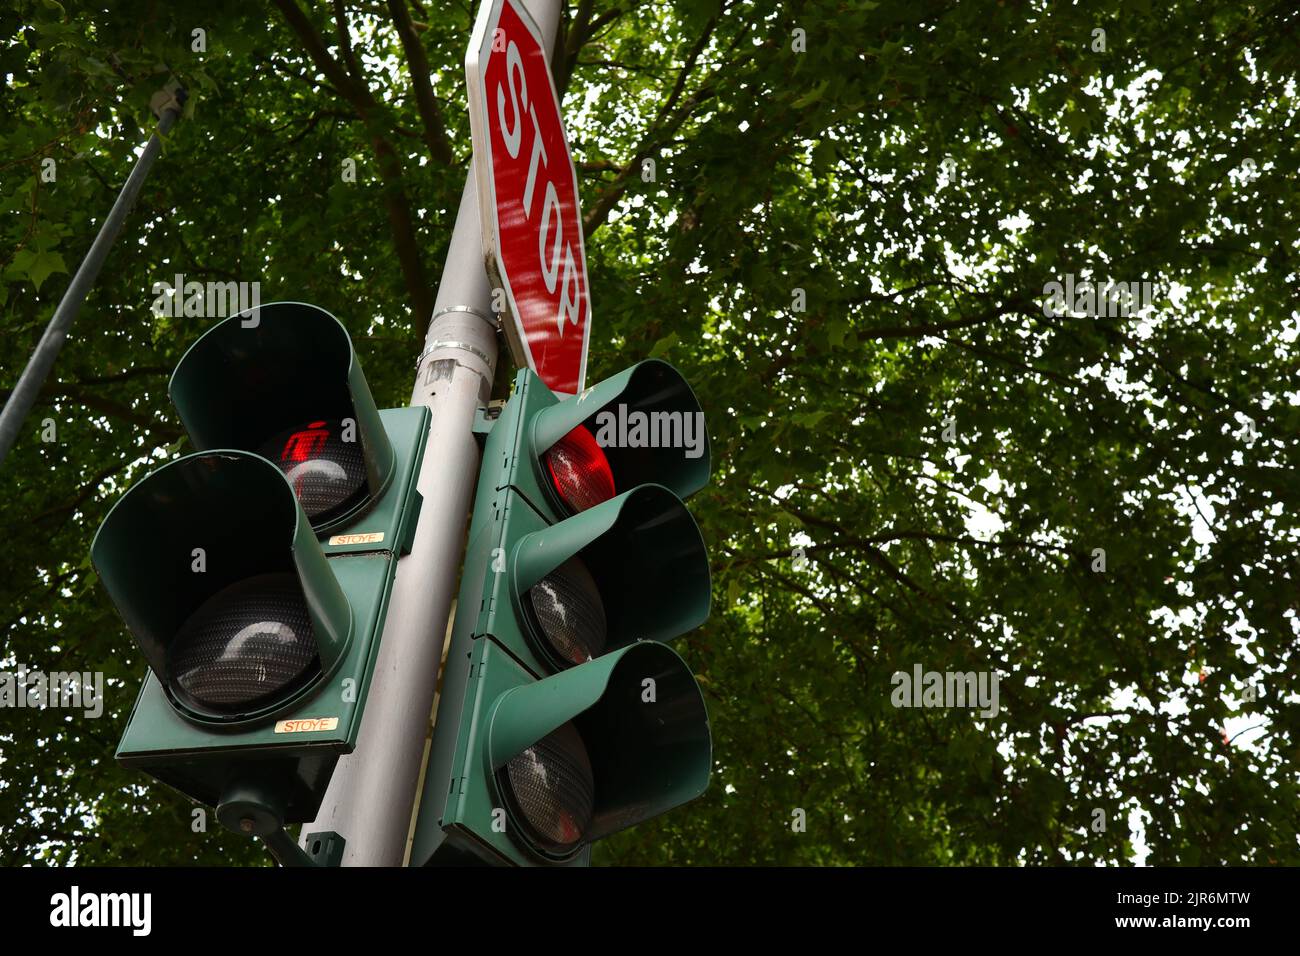 A stop traffic sign with traffic lights on red Stock Photo